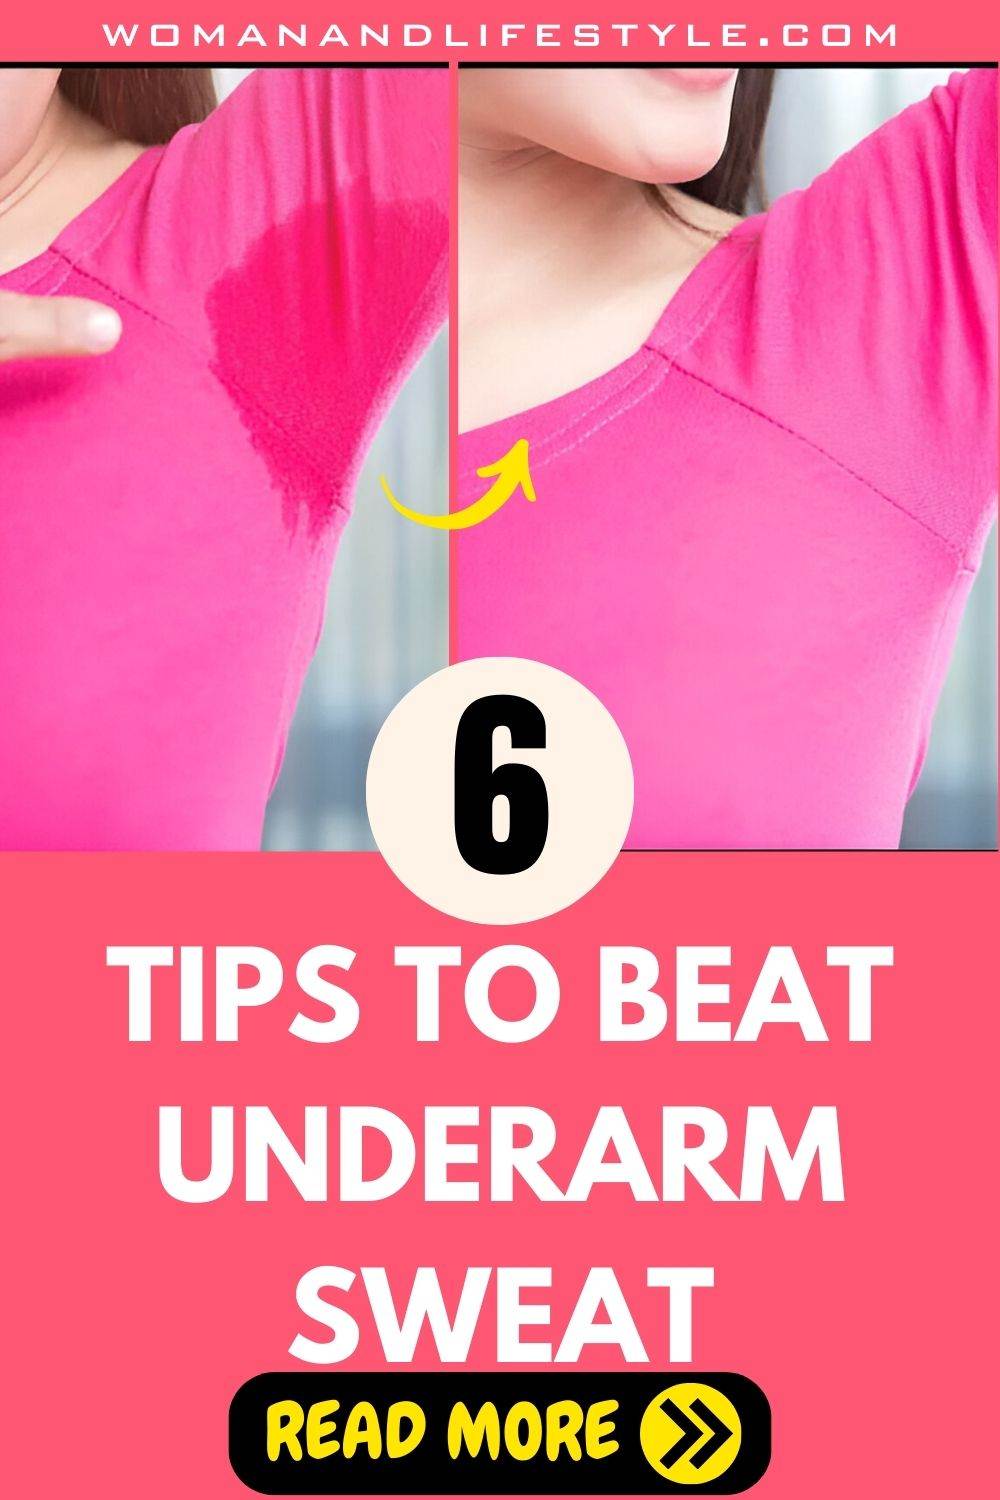 6 Tips To Beat Underarm Sweat, According To Professionals - 29